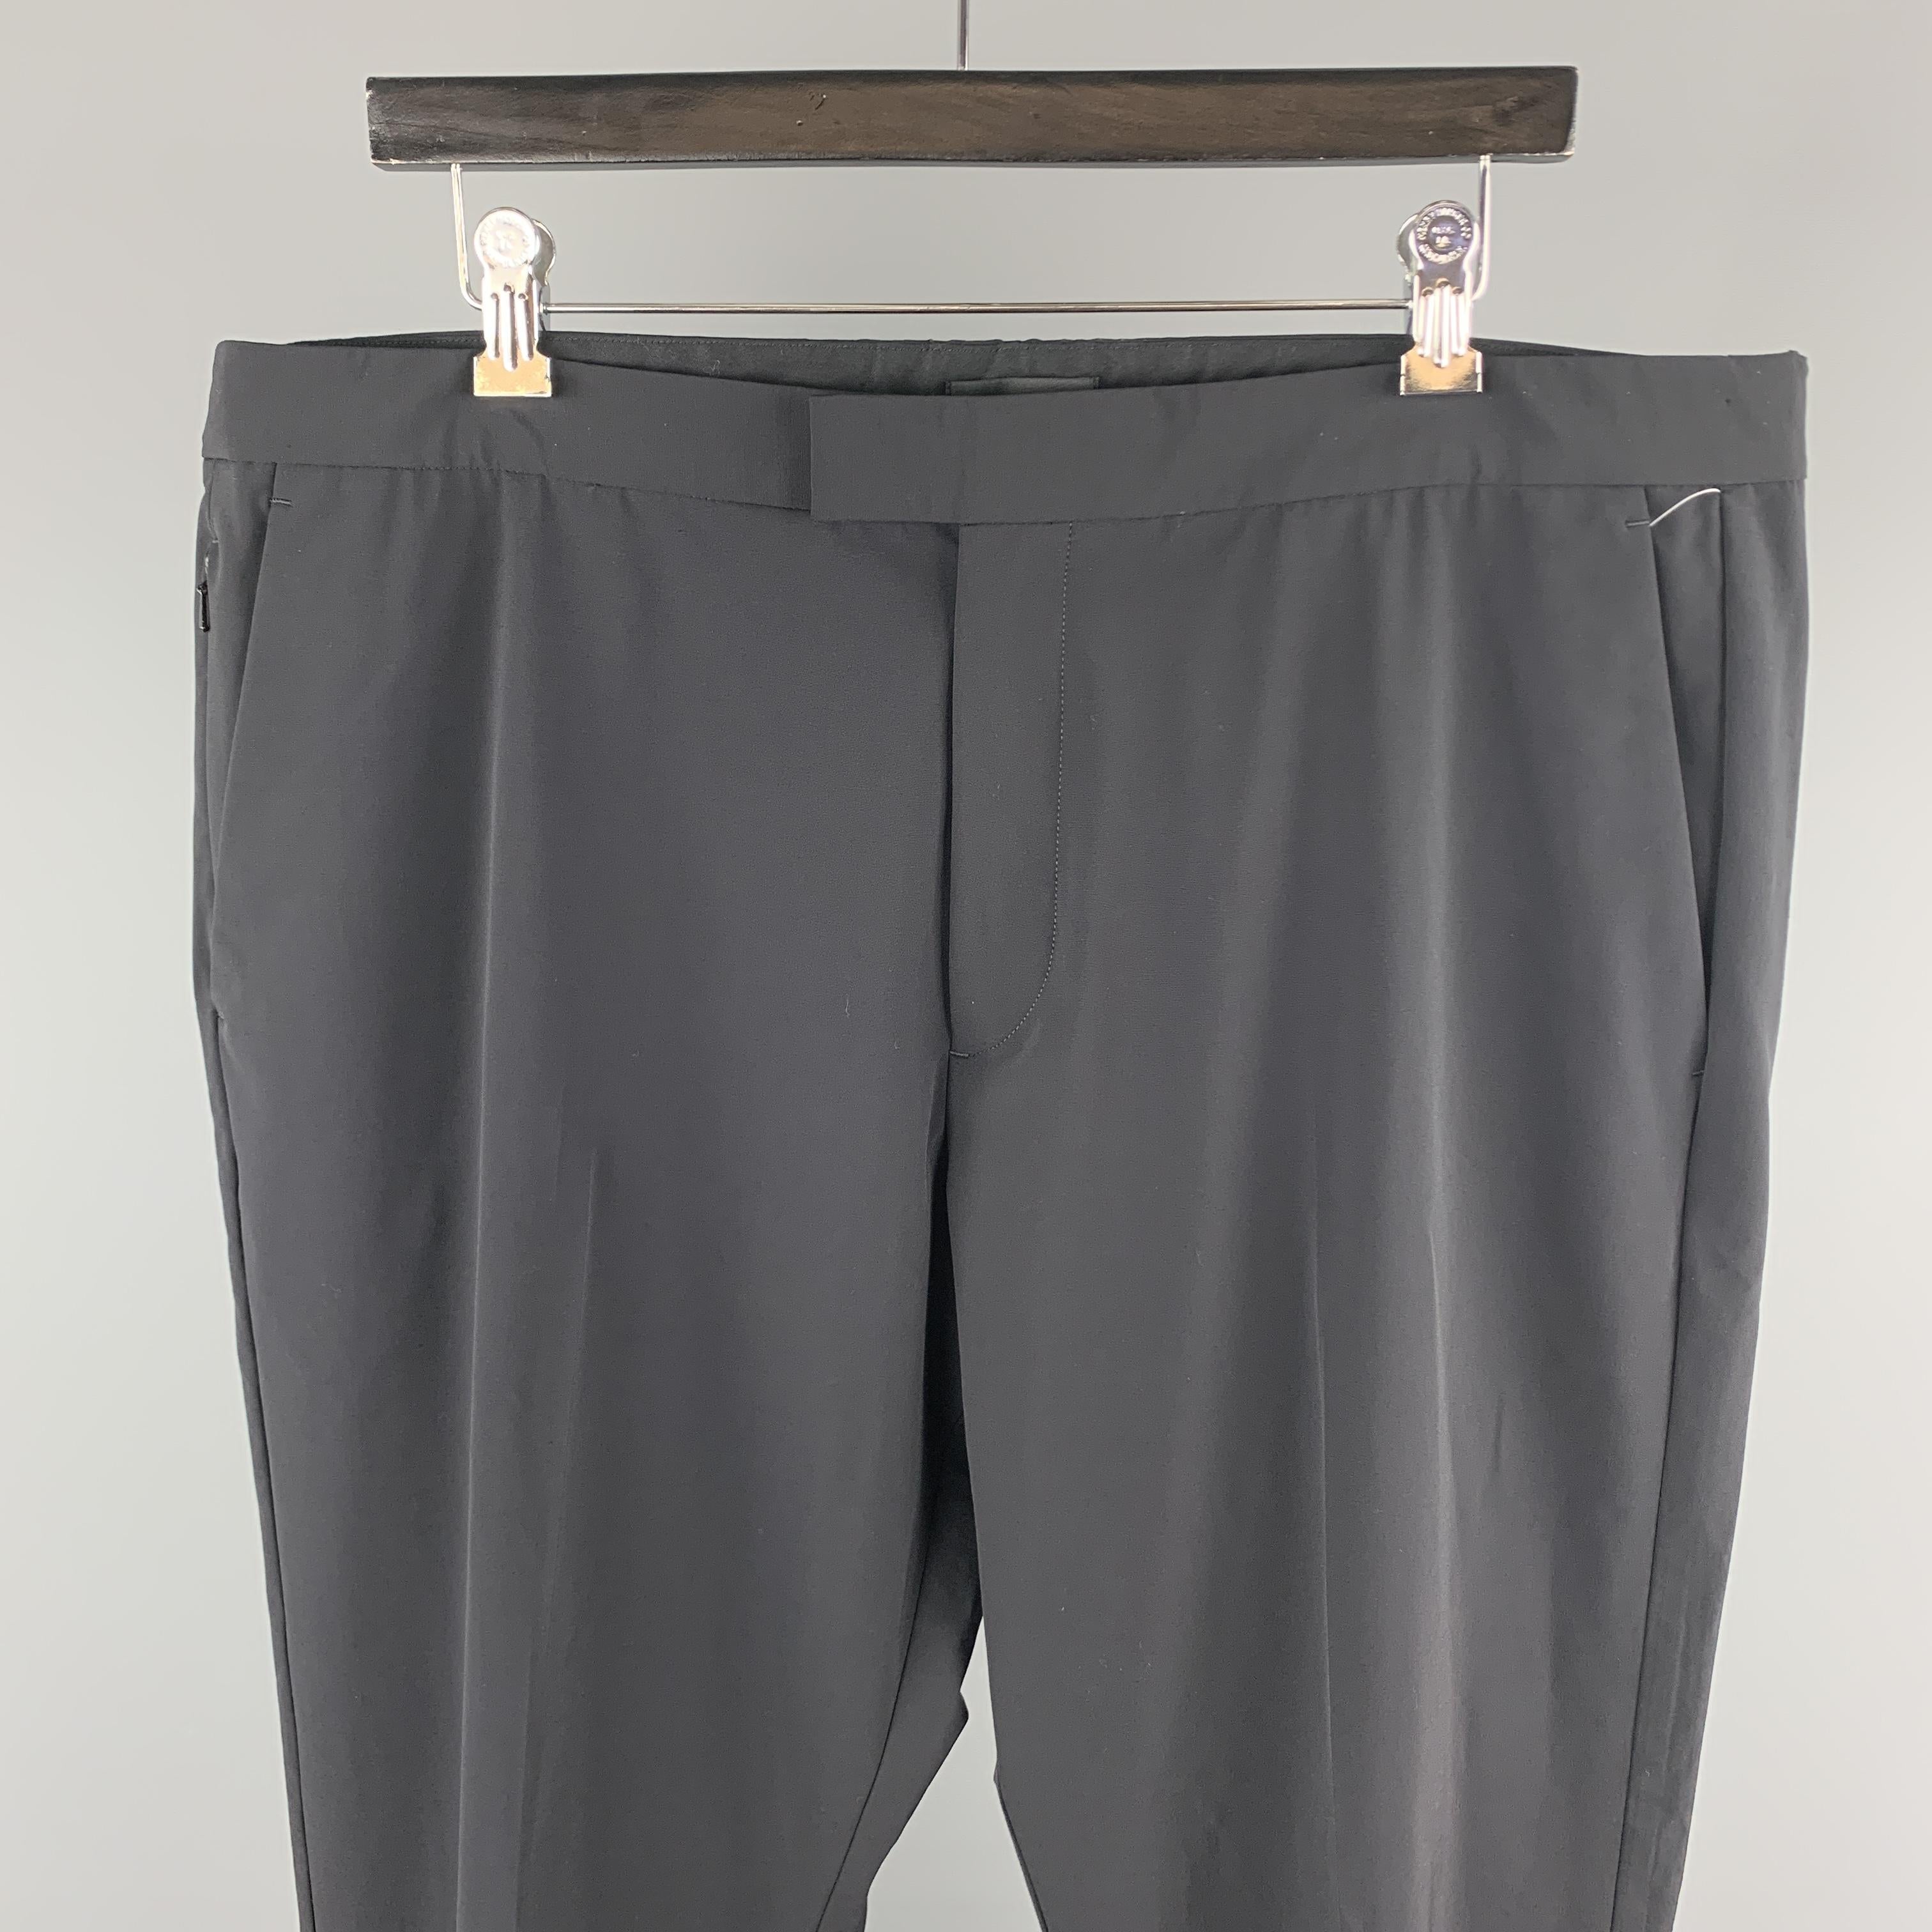 THEORY dress pants comes in a polyester blend featuring a flat front style, front tab, and a zip fly closure.  
 

Excellent Pre-Owned Condition.
Marked: 38

Measurements:

Waist: 38 in. 
Rise: 11 in.
Inseam: 31 in. 
 